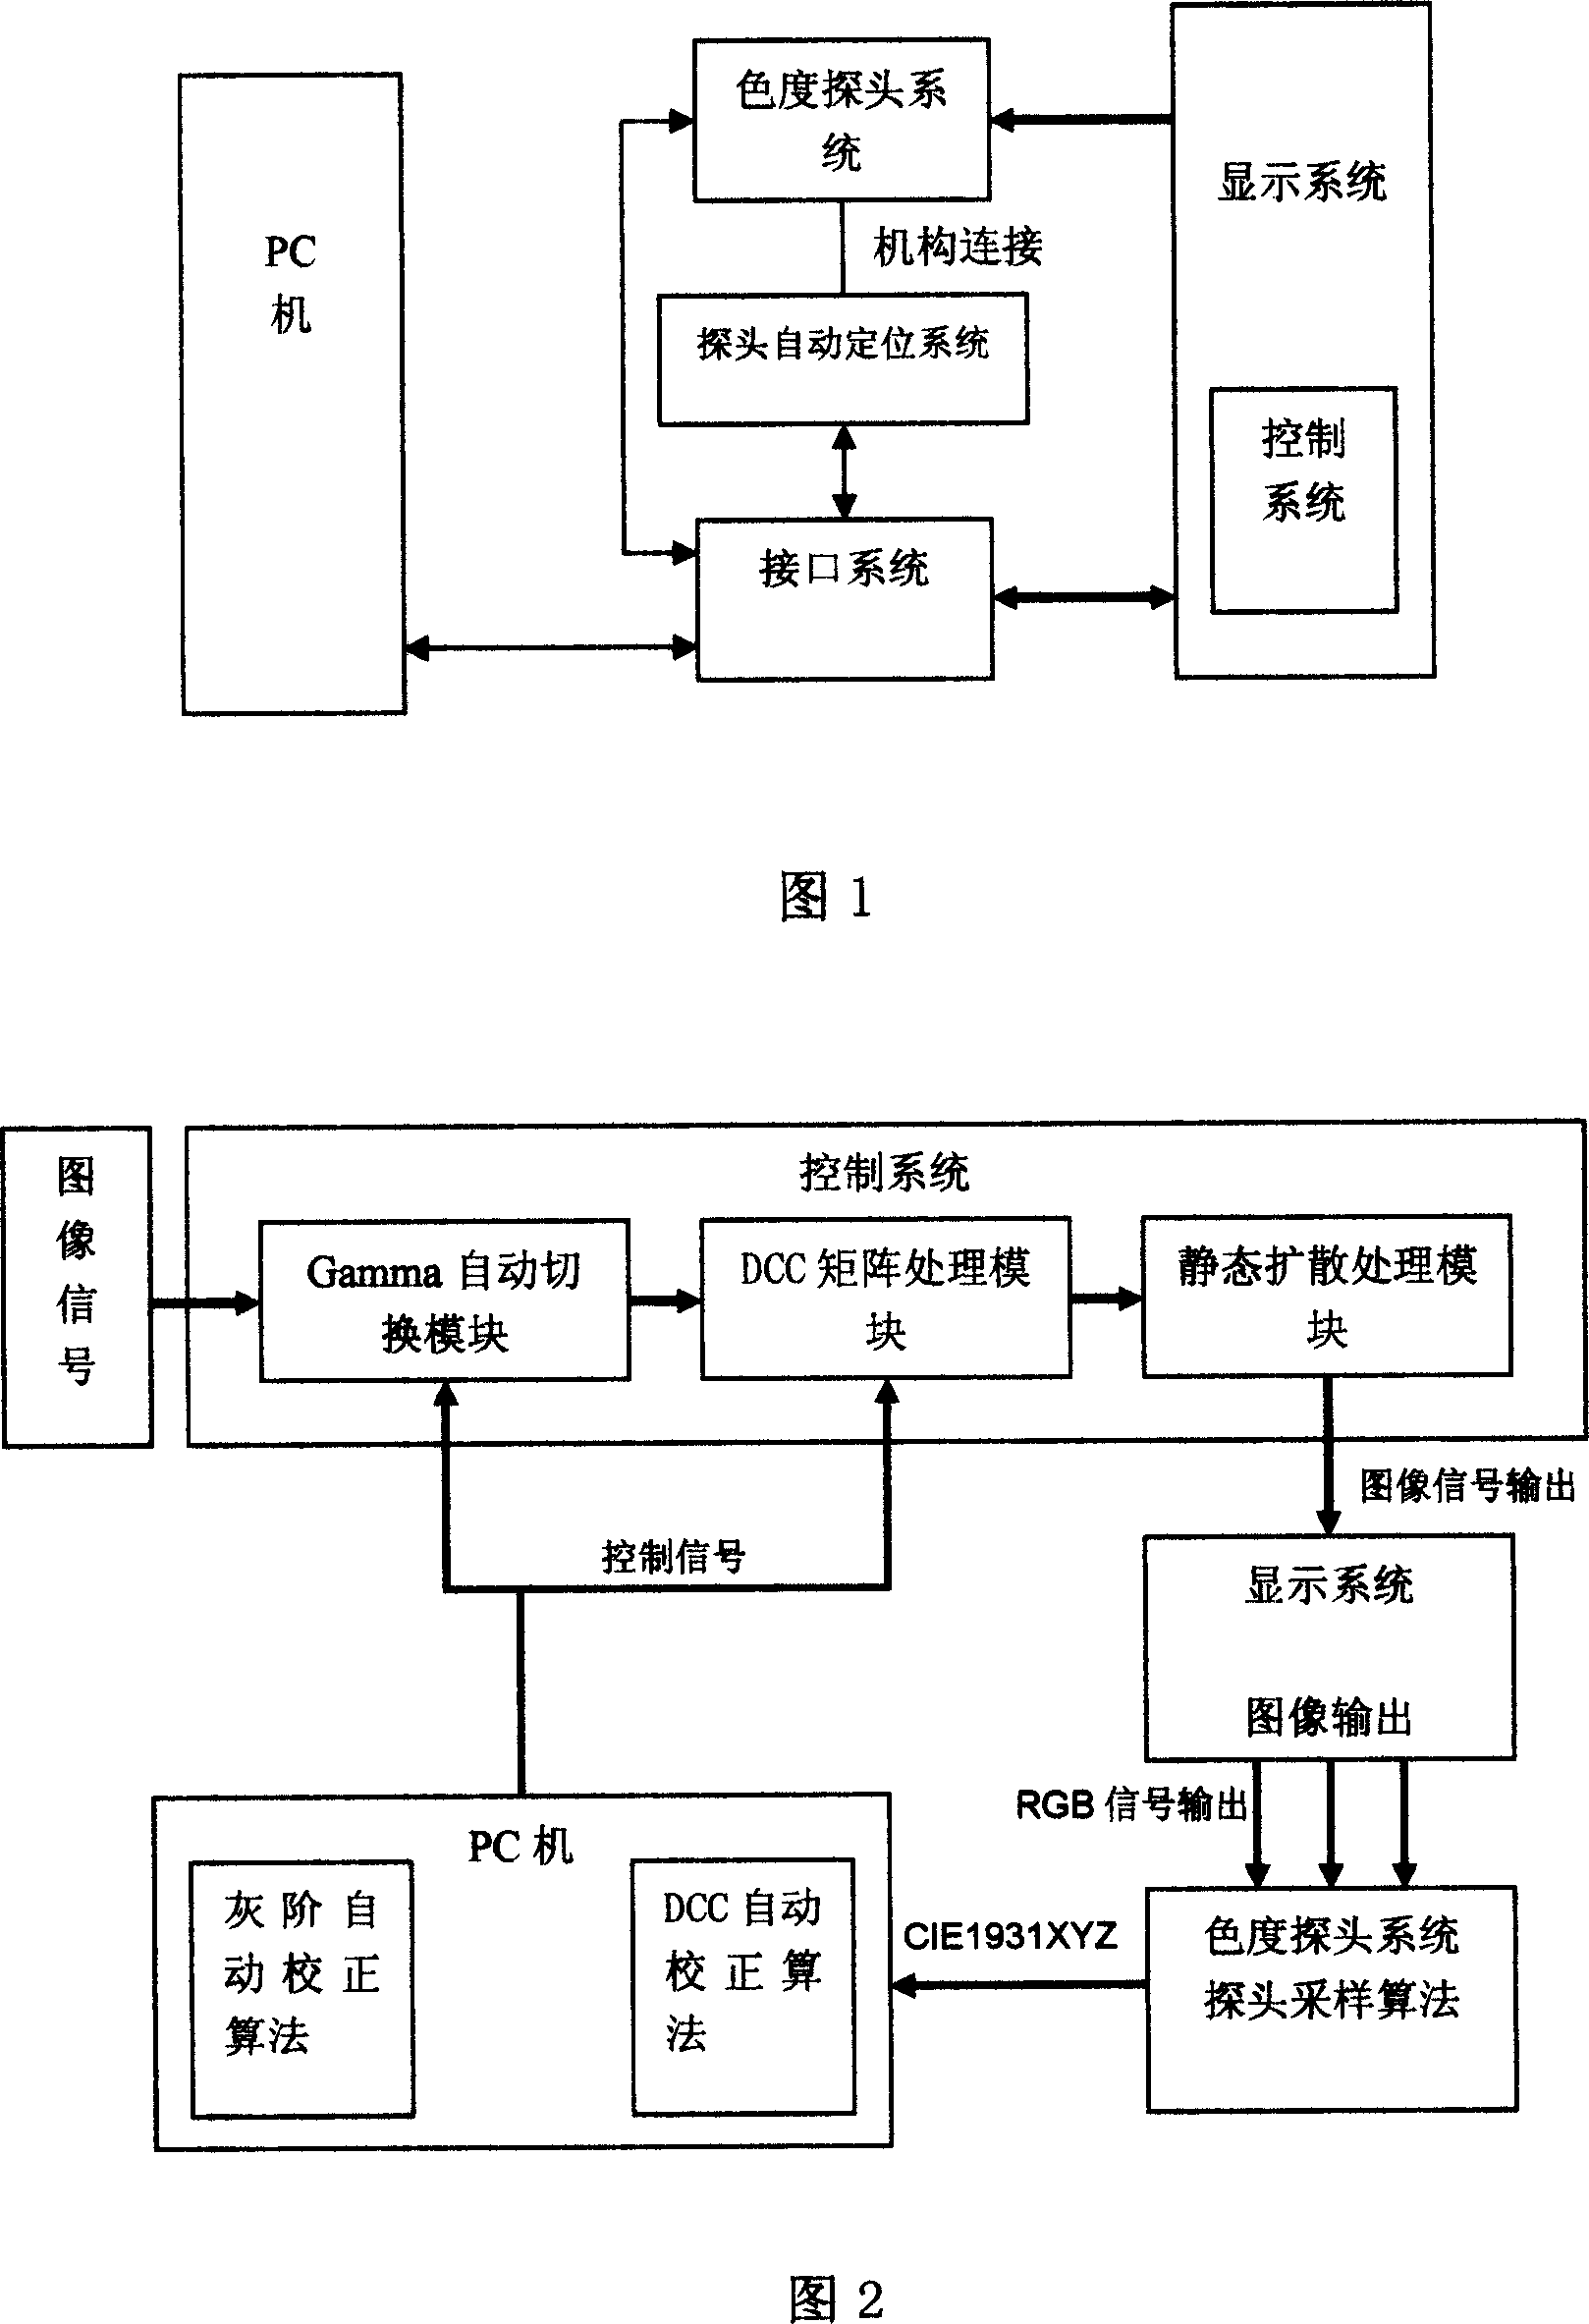 Color management system for mixed connection wall and its control method